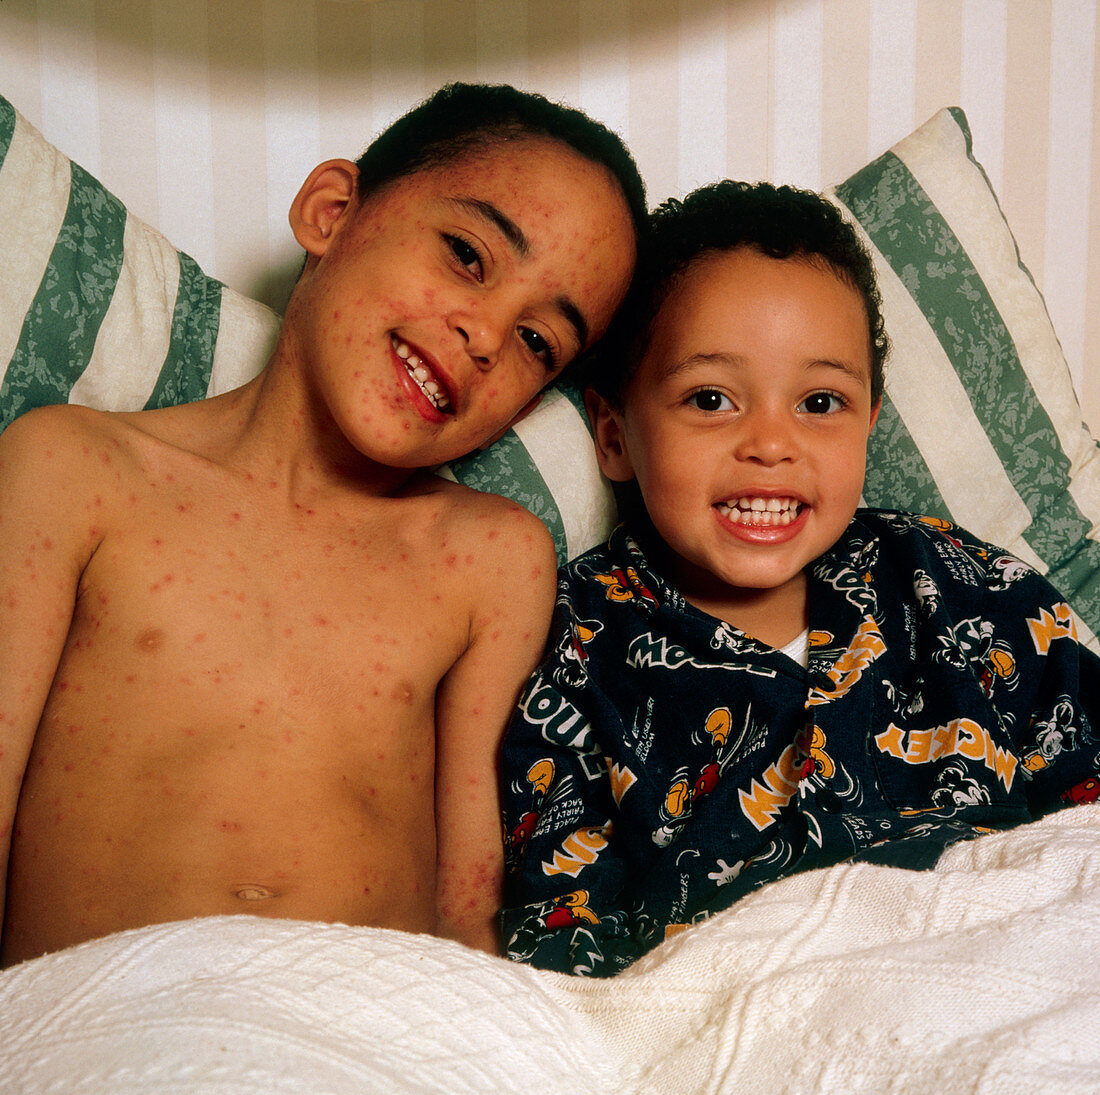 Boy with chickenpox sits in bed with brother